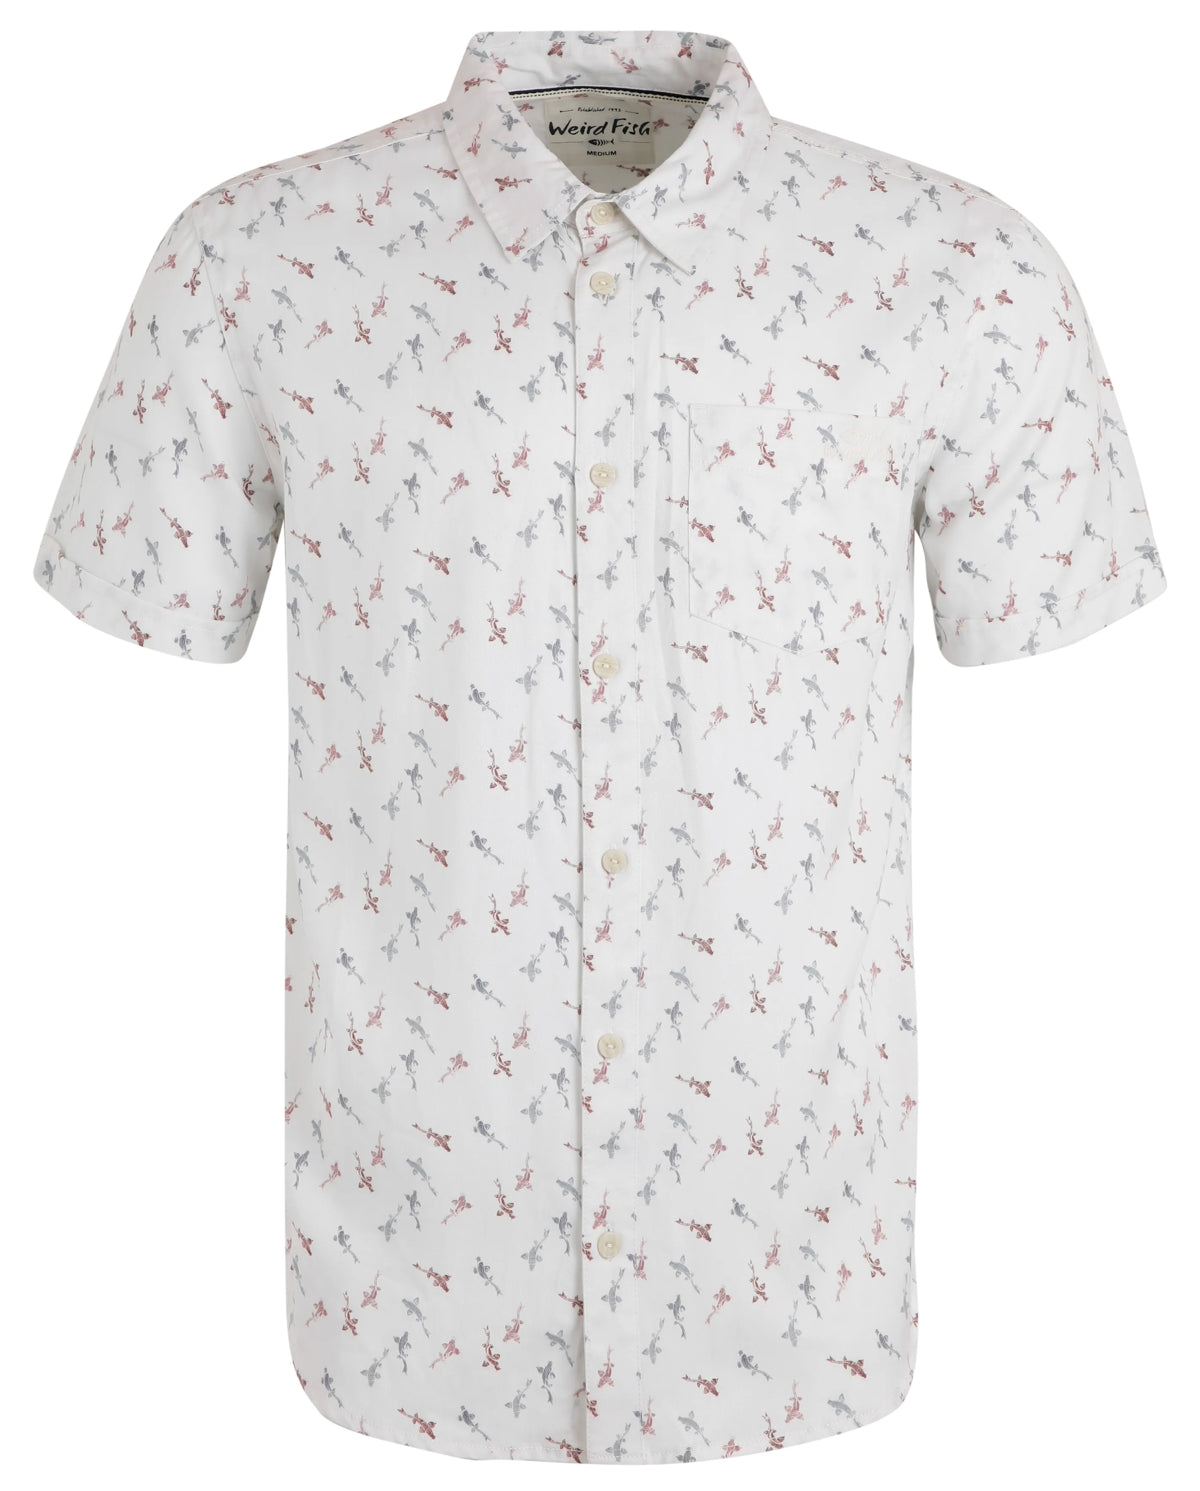 Weird Fish men's Keilor short sleeve Tencel shirt in white with a fish pattern.